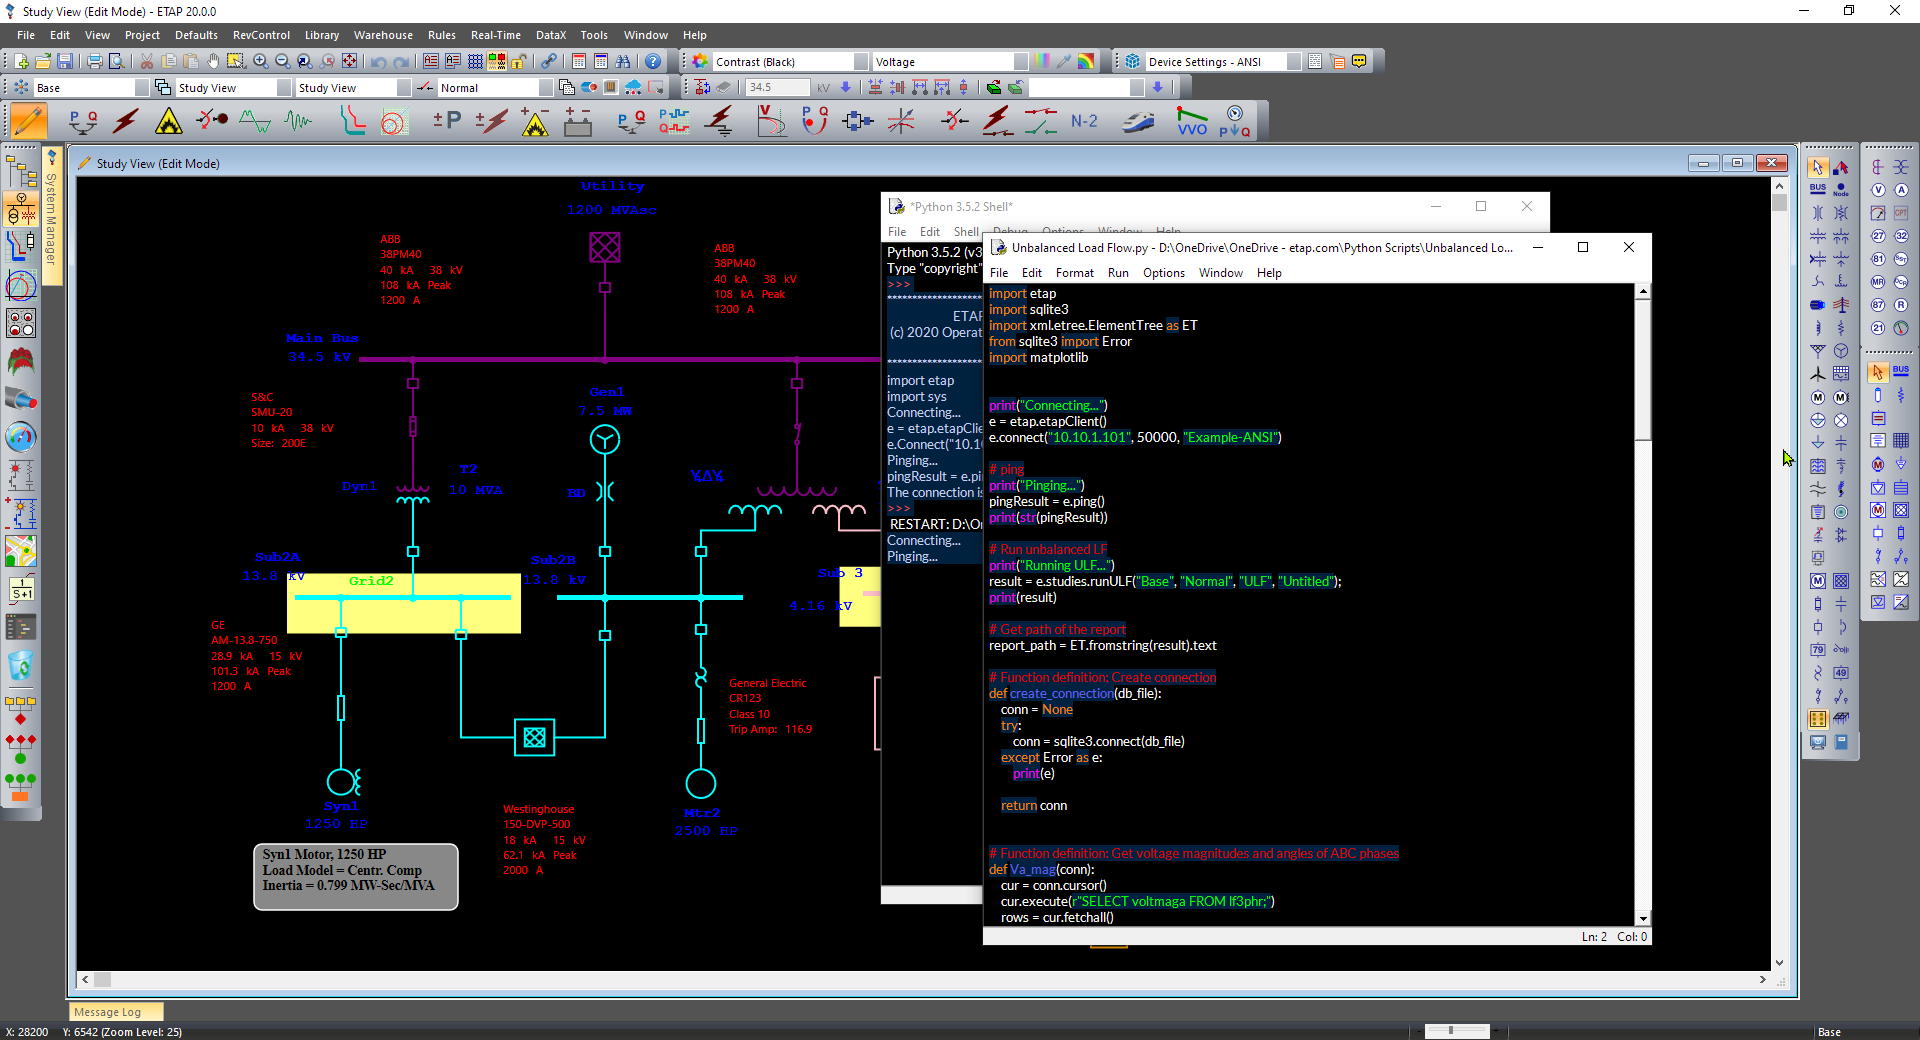 Power System Design, Reporting, Tracking, & Scripting Tools